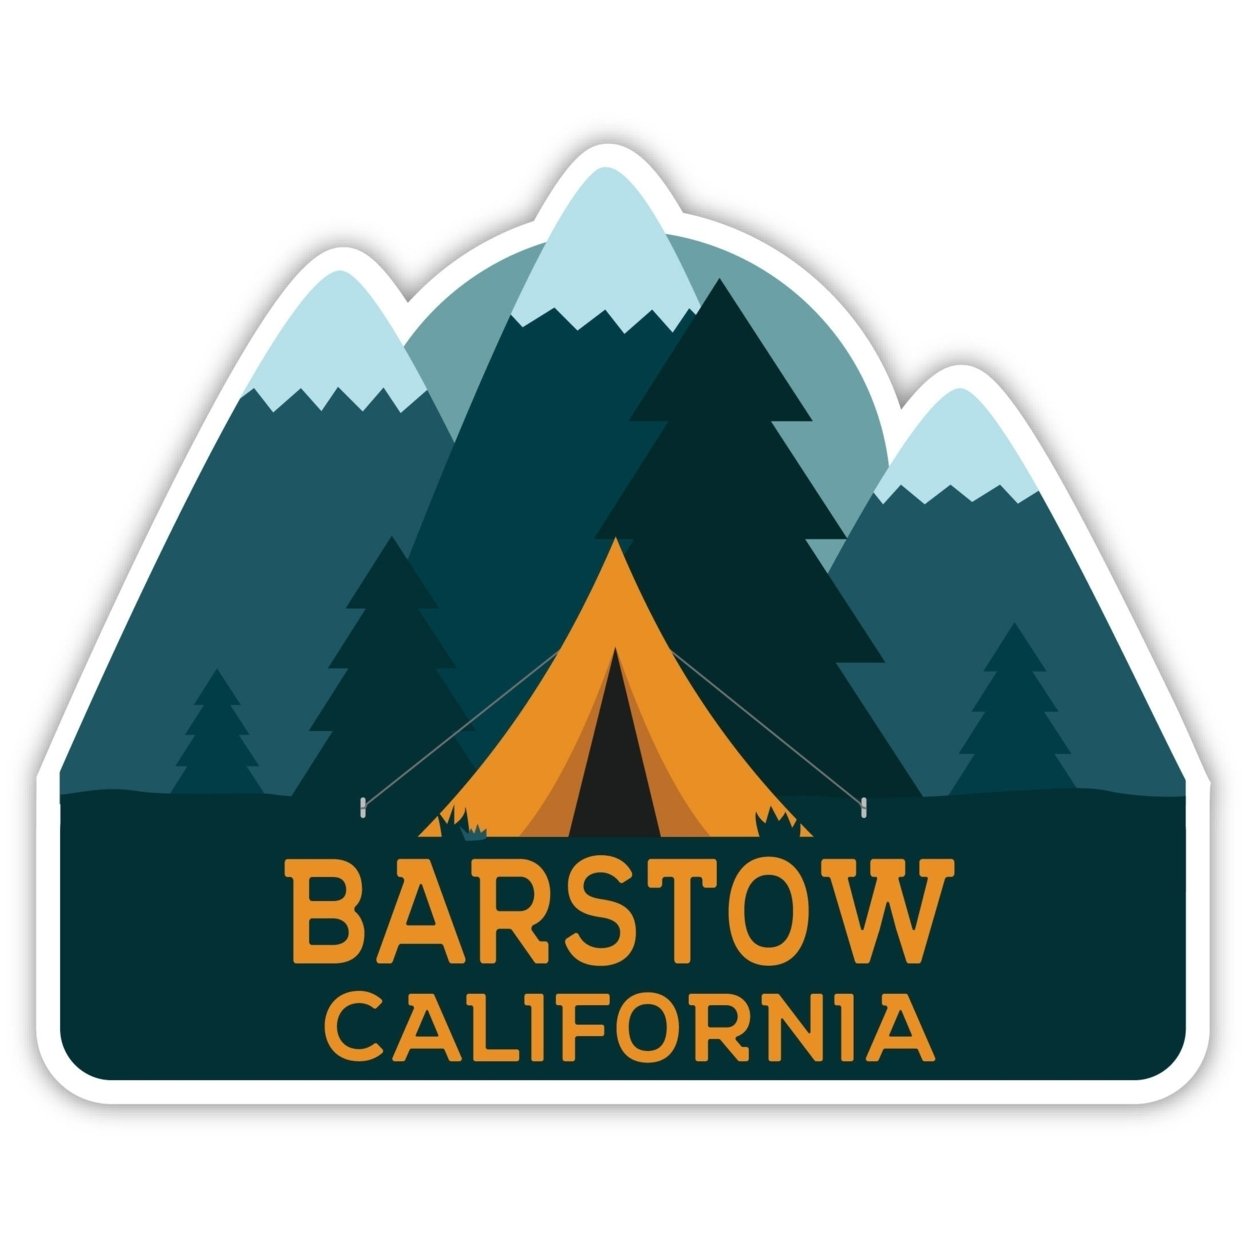 Barstow California Souvenir Decorative Stickers (Choose Theme And Size) - 4-Pack, 10-Inch, Camp Life